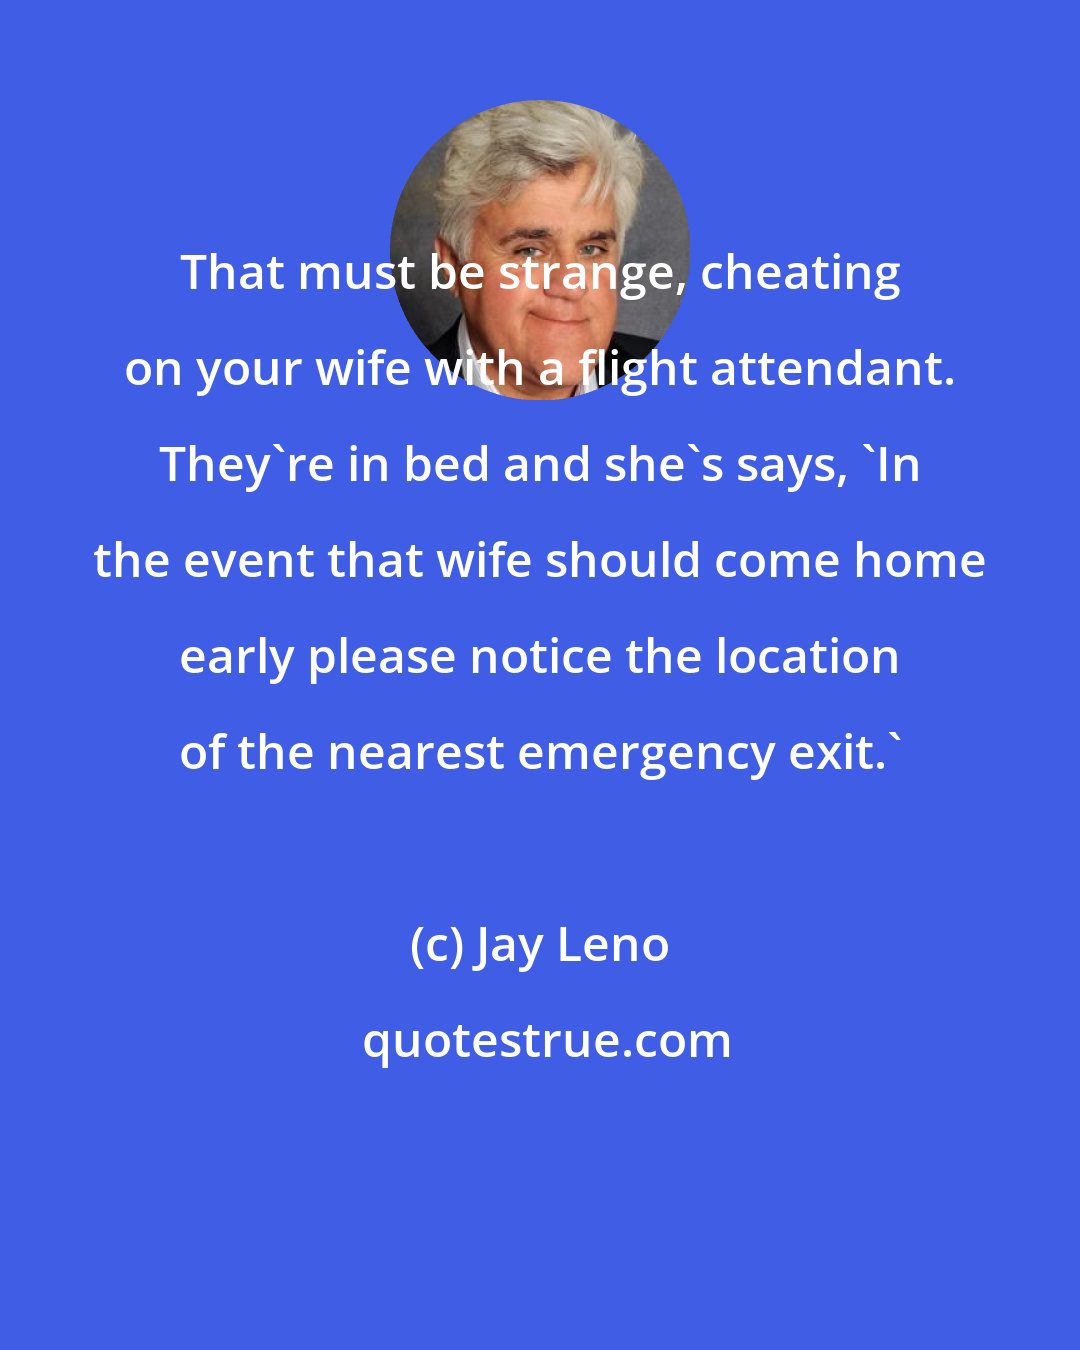 Jay Leno: That must be strange, cheating on your wife with a flight attendant. They're in bed and she's says, 'In the event that wife should come home early please notice the location of the nearest emergency exit.'